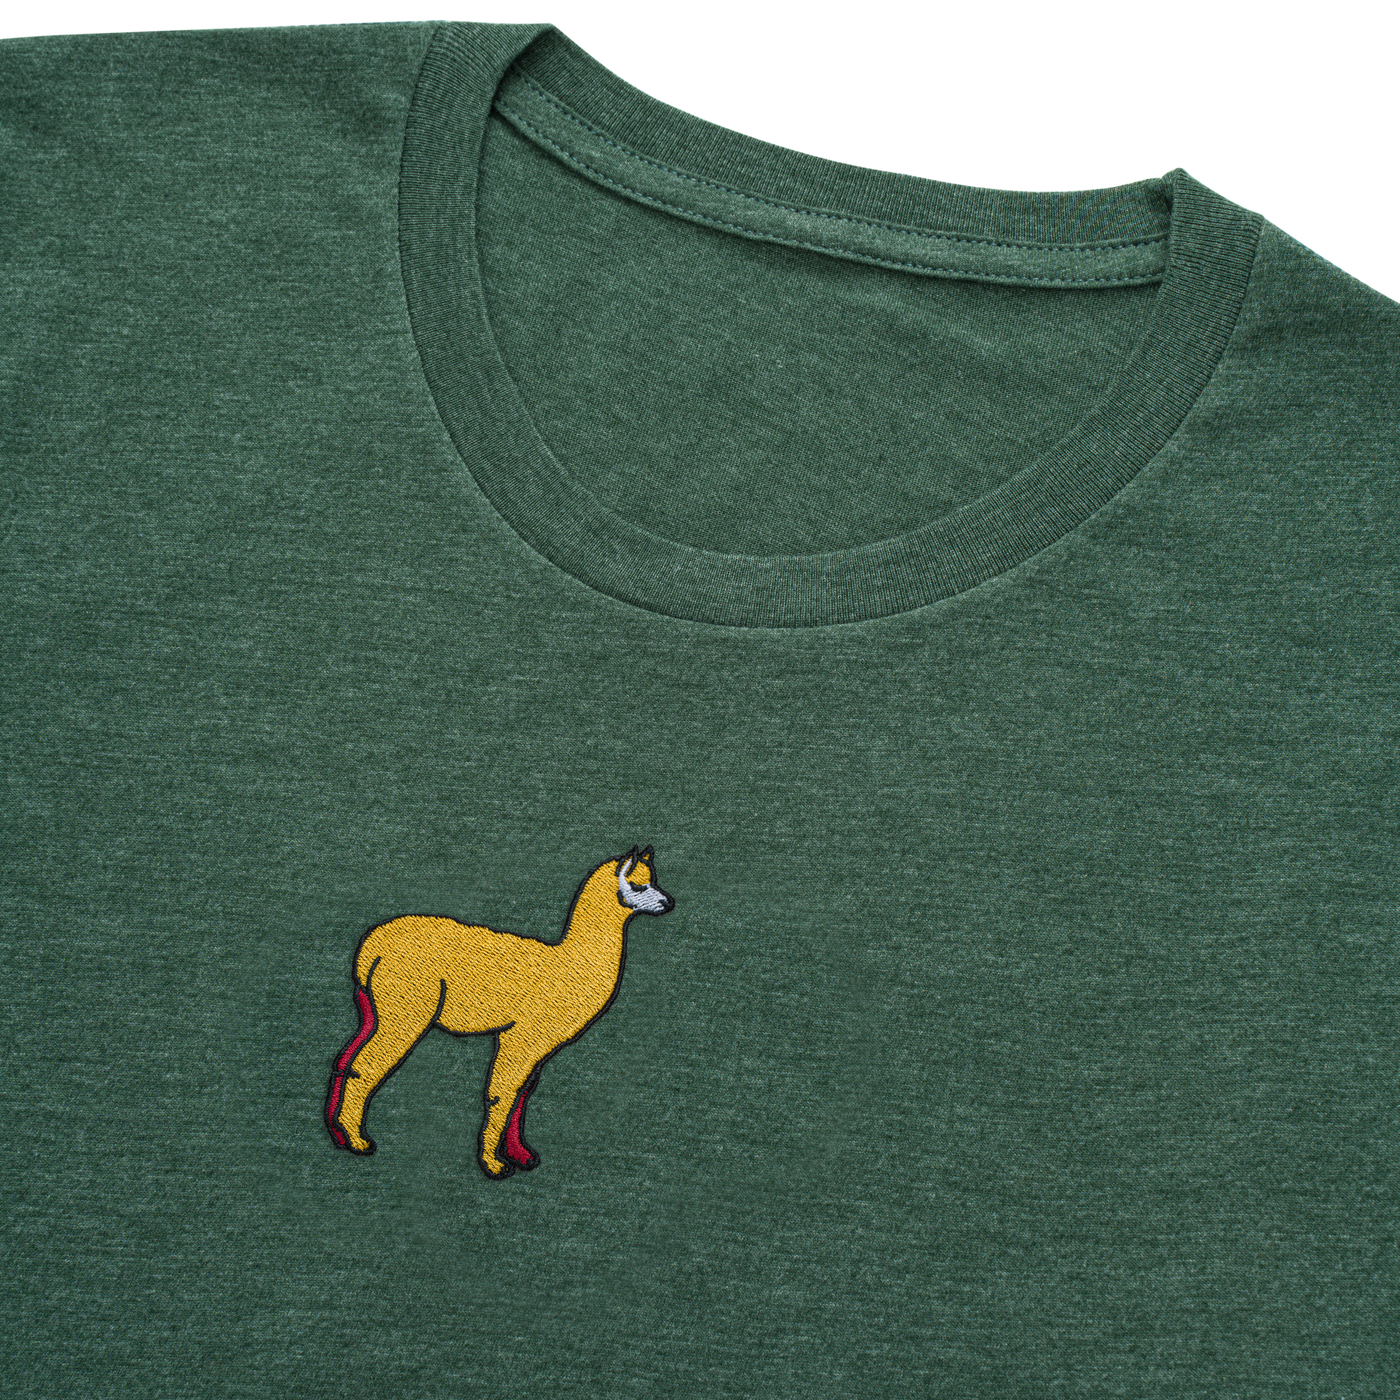 Bobby's Planet Kids Embroidered Alpaca T-Shirt from South American Amazon Animals Collection in Heather Forest Color#color_heather-forest